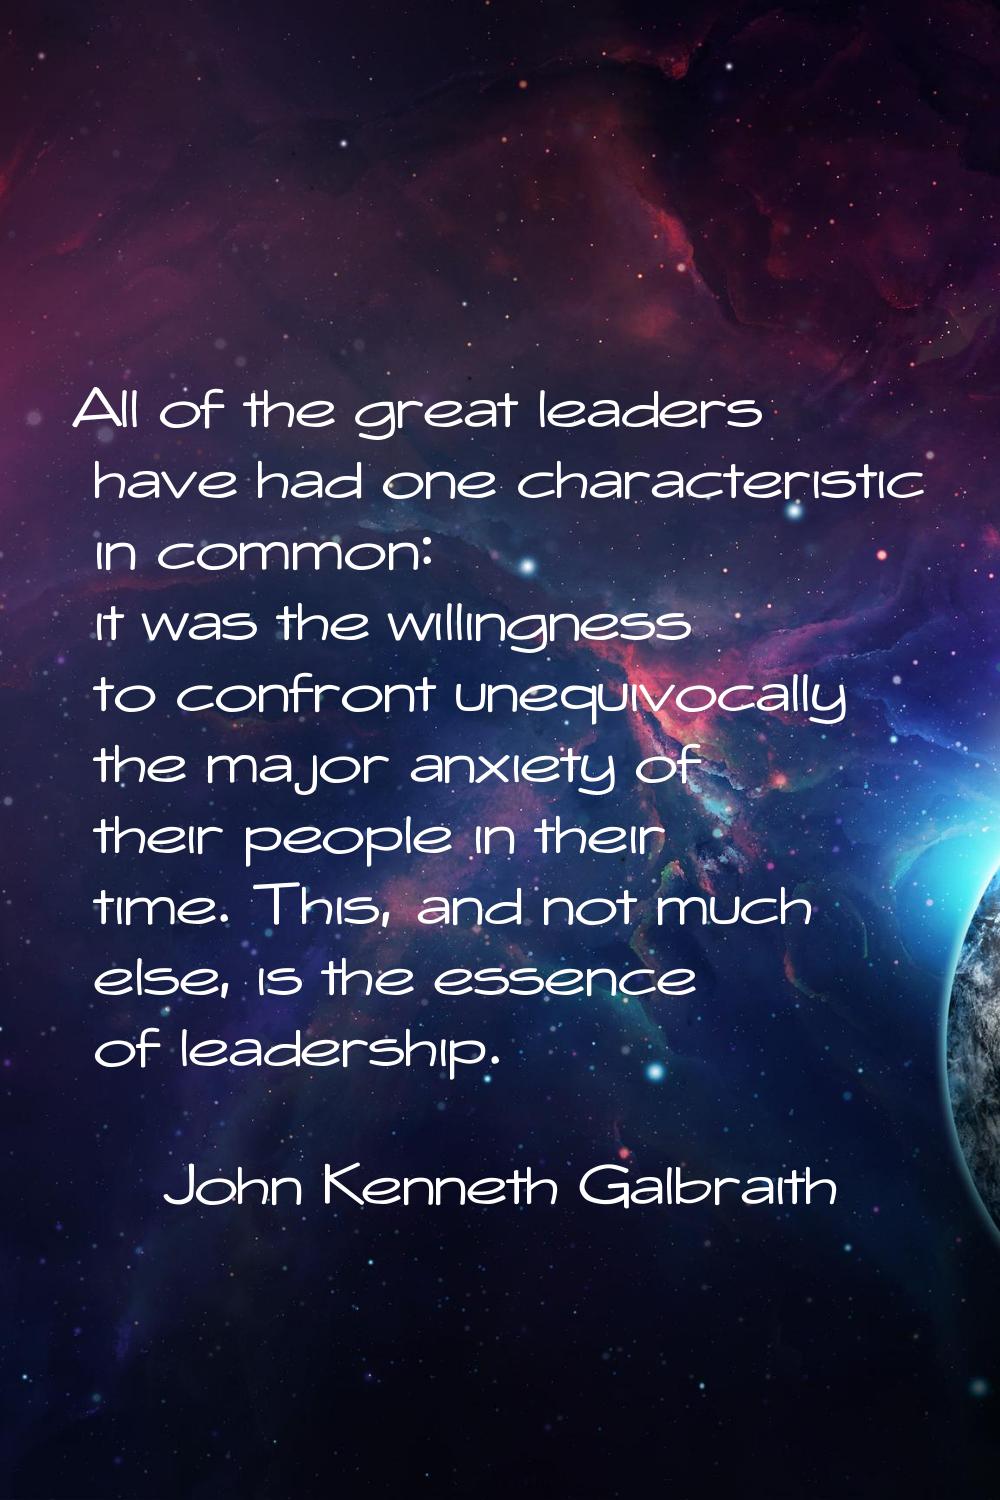 All of the great leaders have had one characteristic in common: it was the willingness to confront 